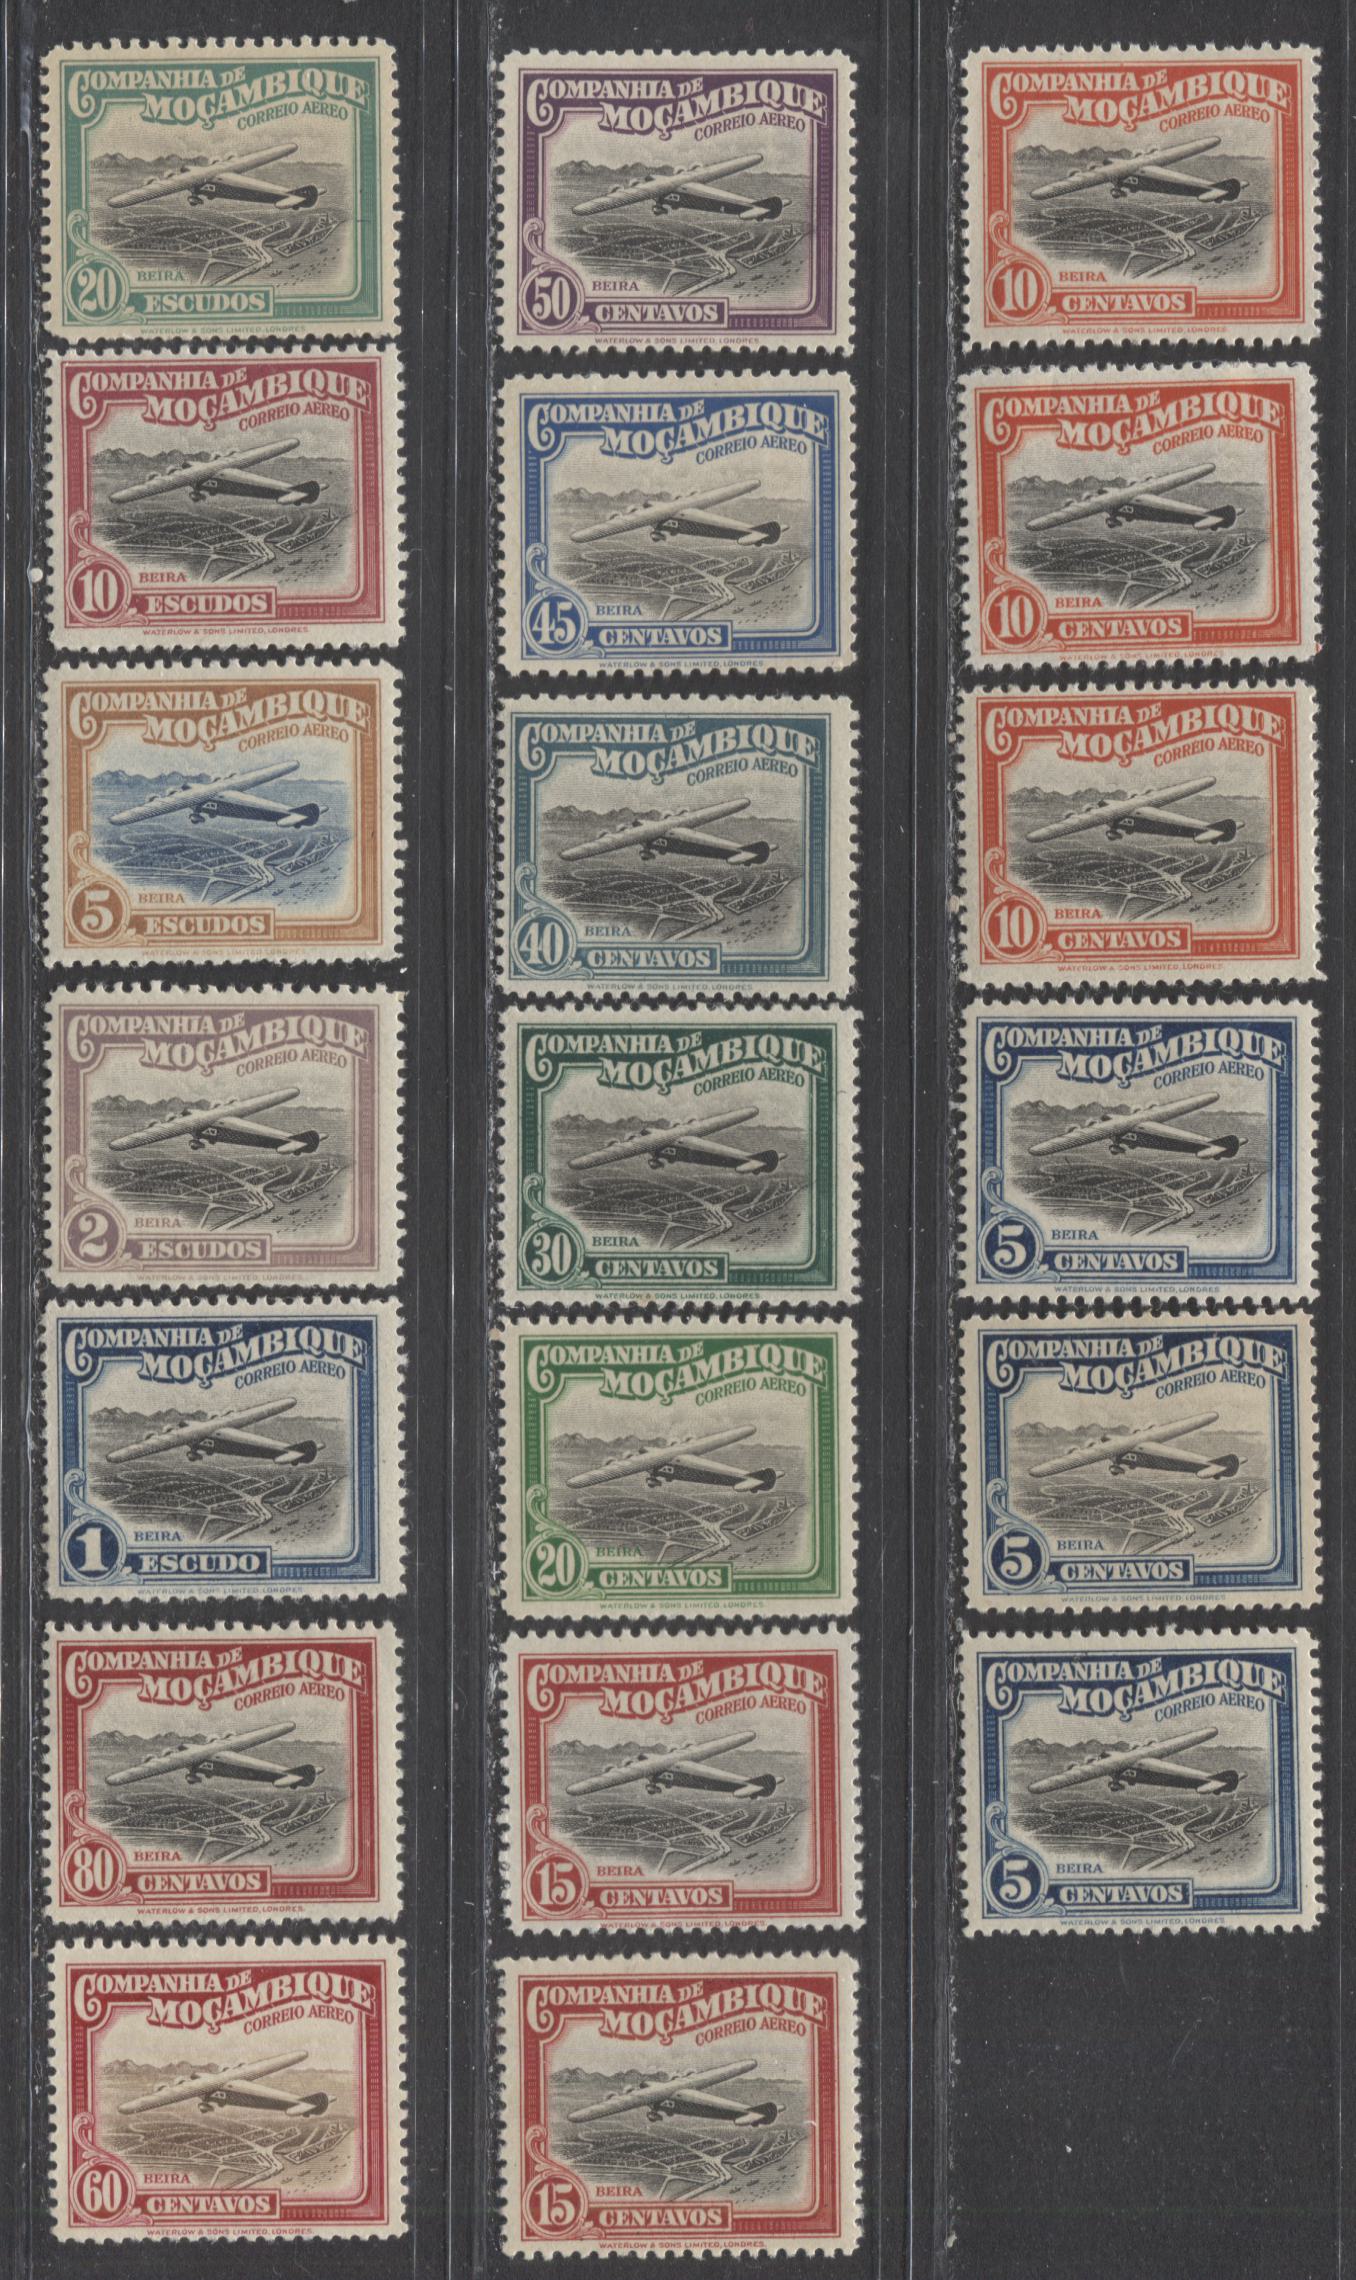 Lot 234 Mozambique Company SC#C1-C15 1935 Pictorial Definitives, A F/VFOG & NH Range Of Singles, 2017 Scott Cat. $12.8 USD, Click on Listing to See ALL Pictures